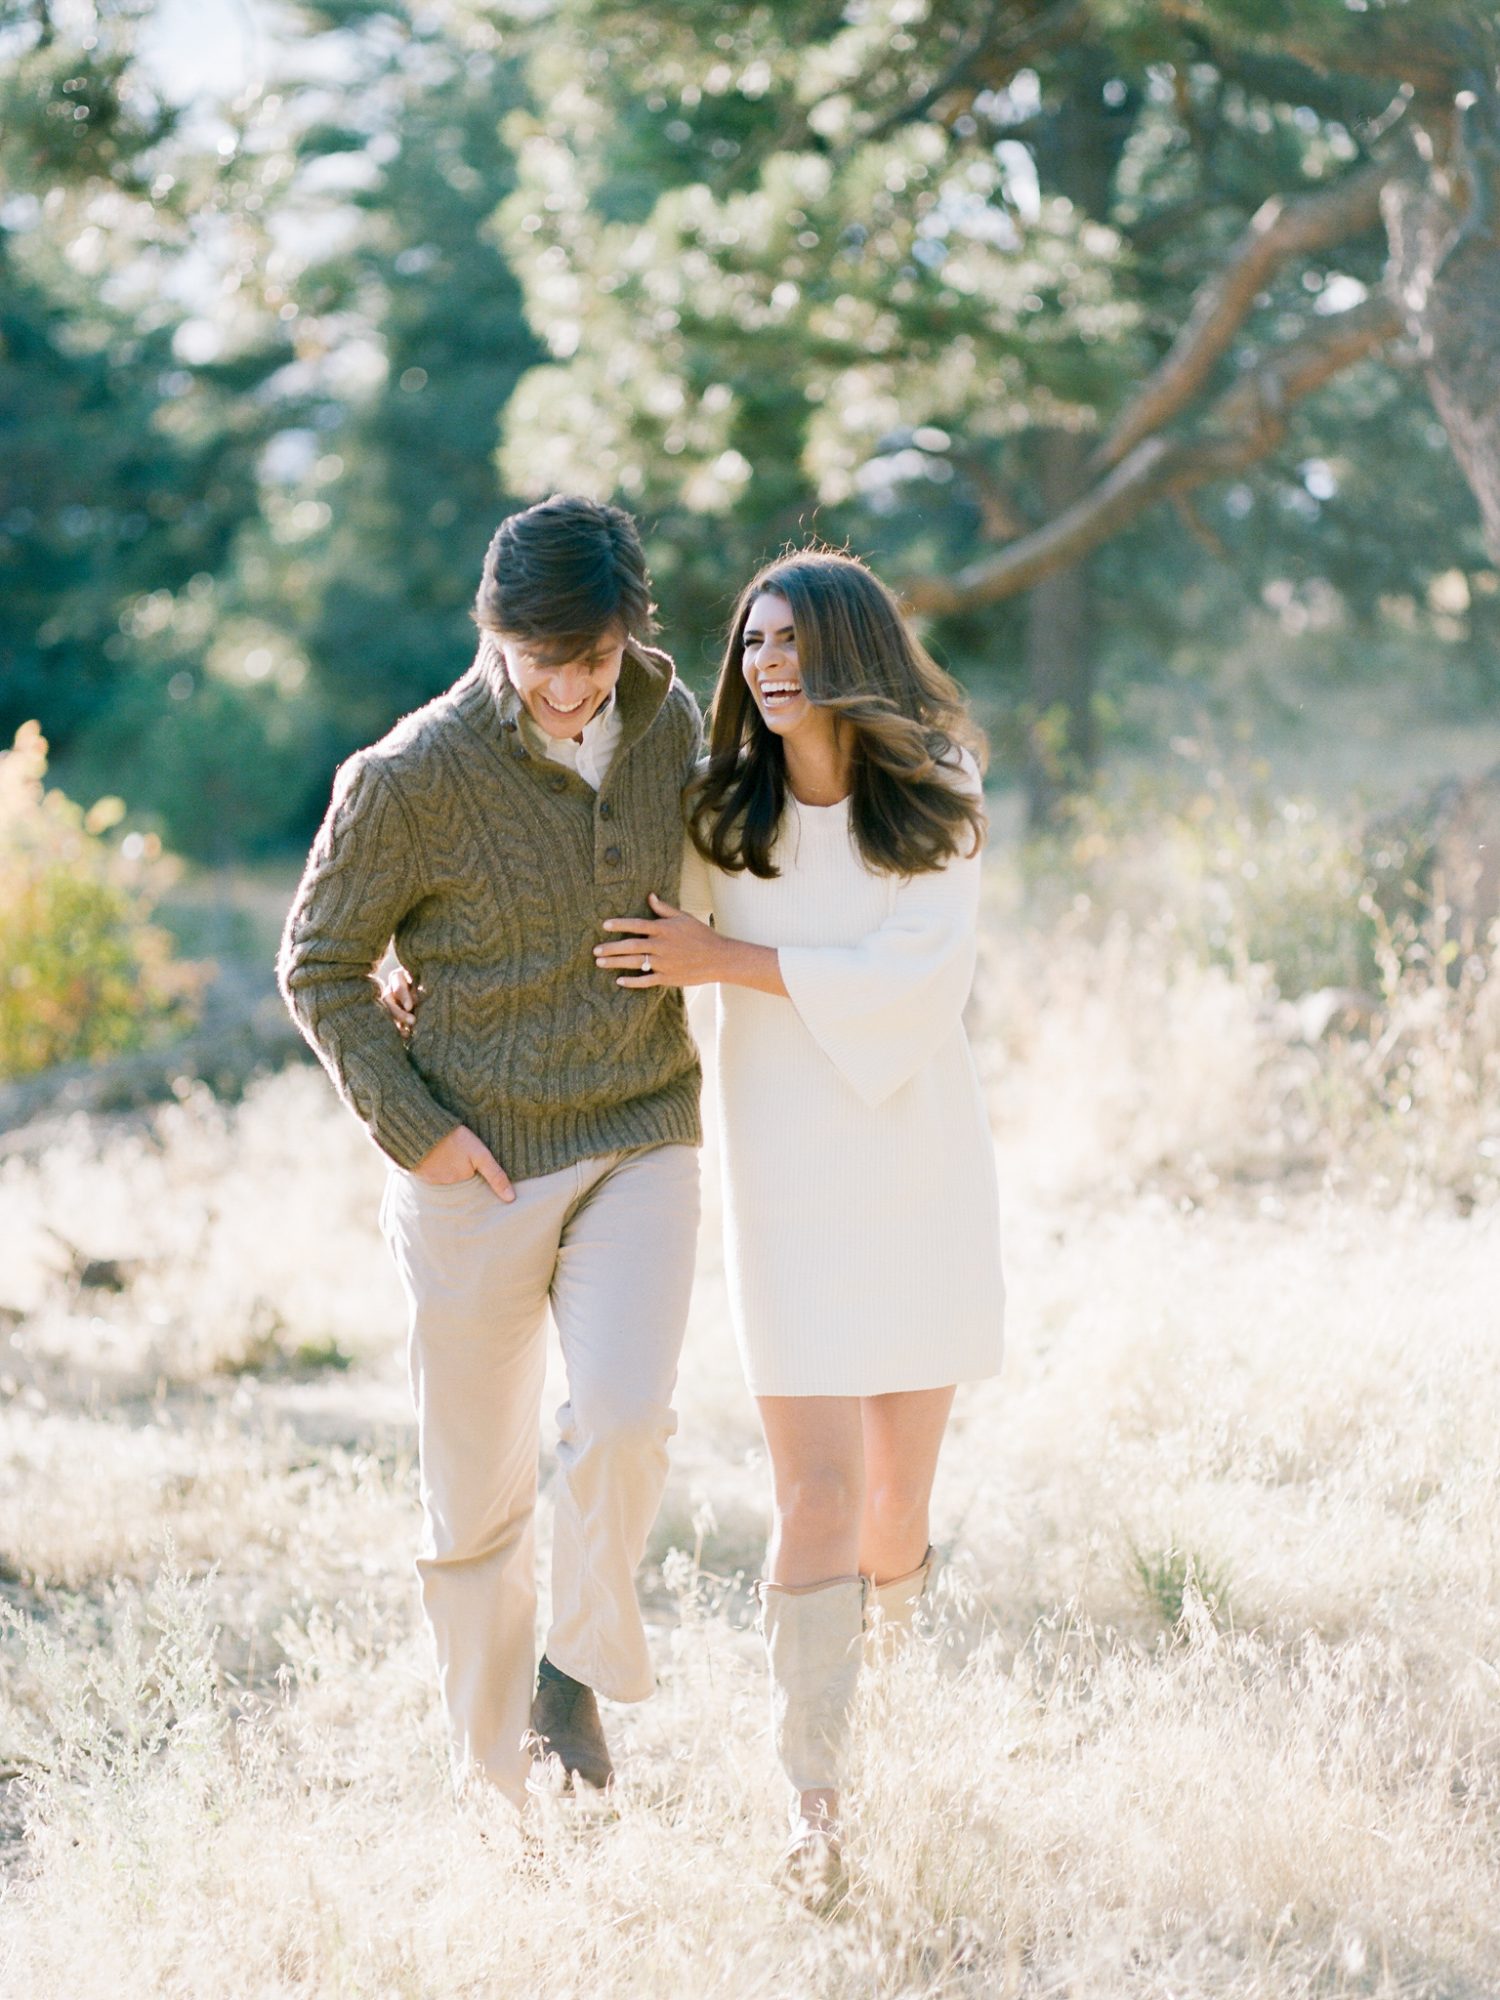 Natural + Playful Engagement Session by Rachel Havel